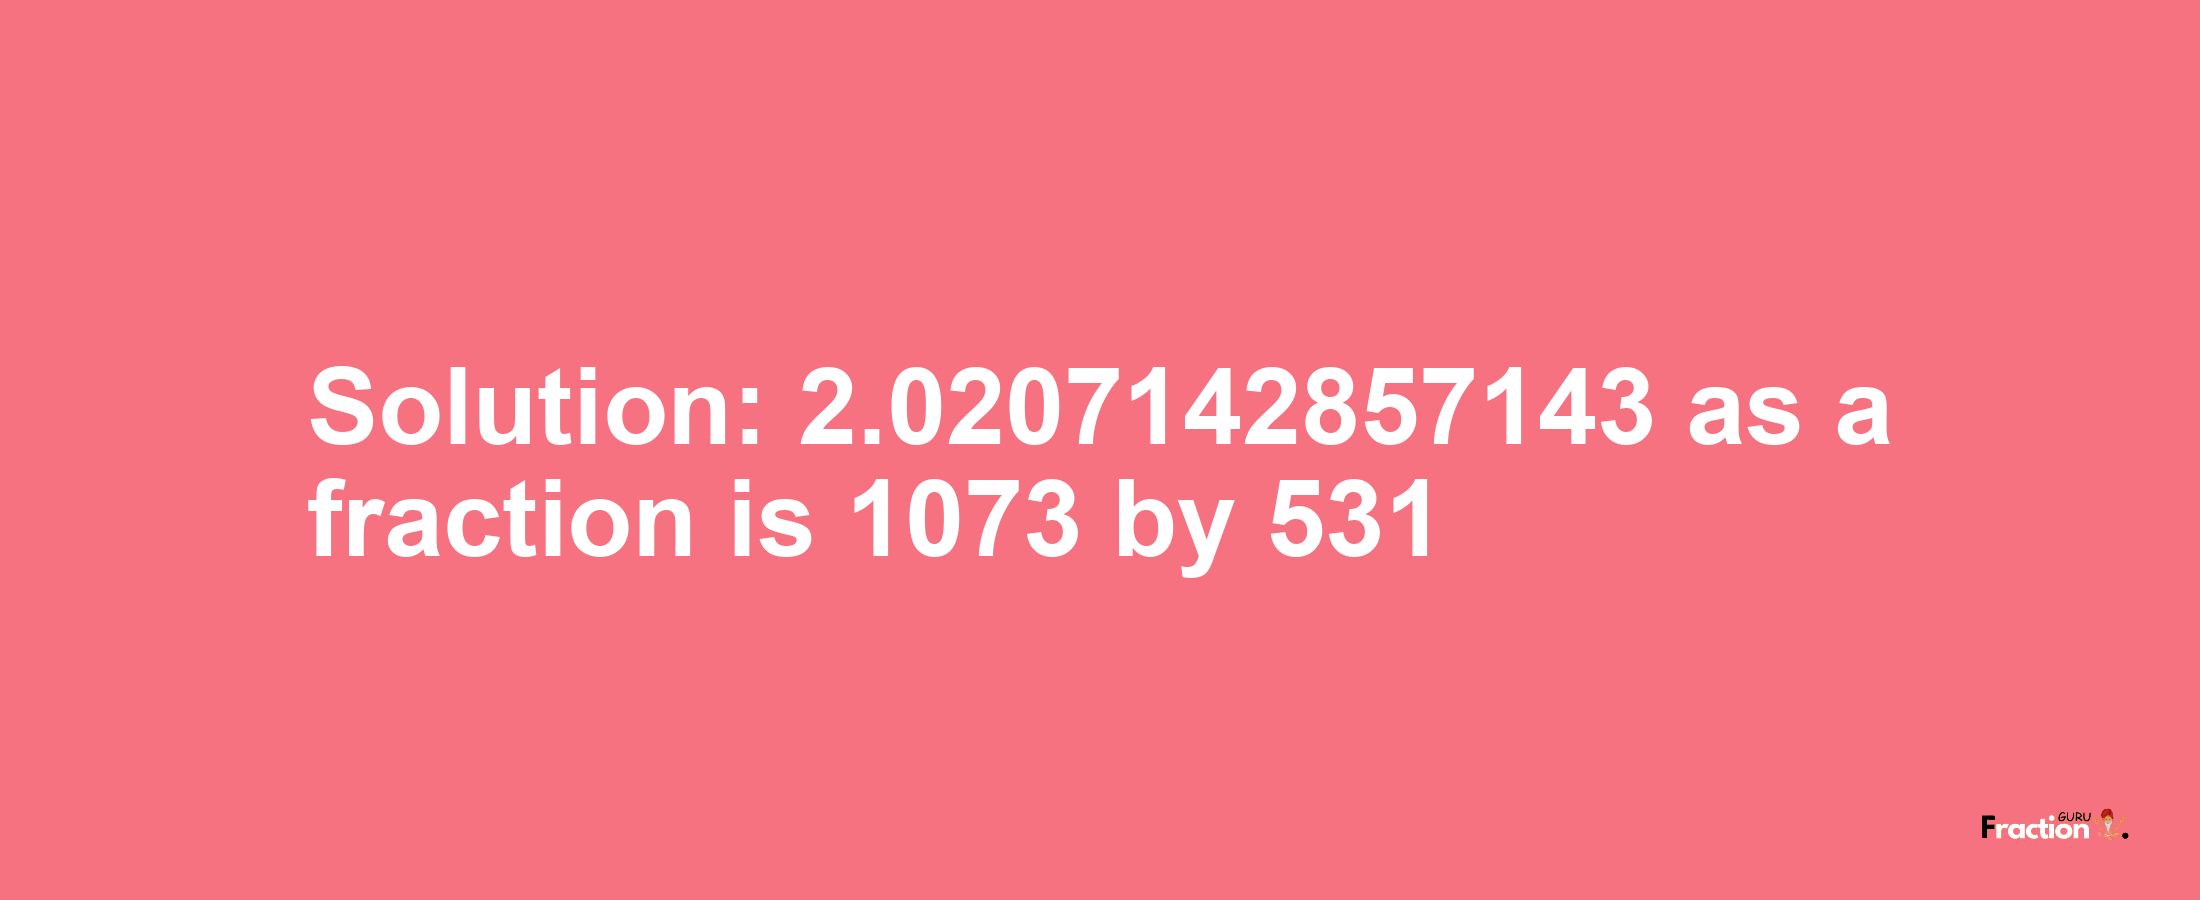 Solution:2.0207142857143 as a fraction is 1073/531